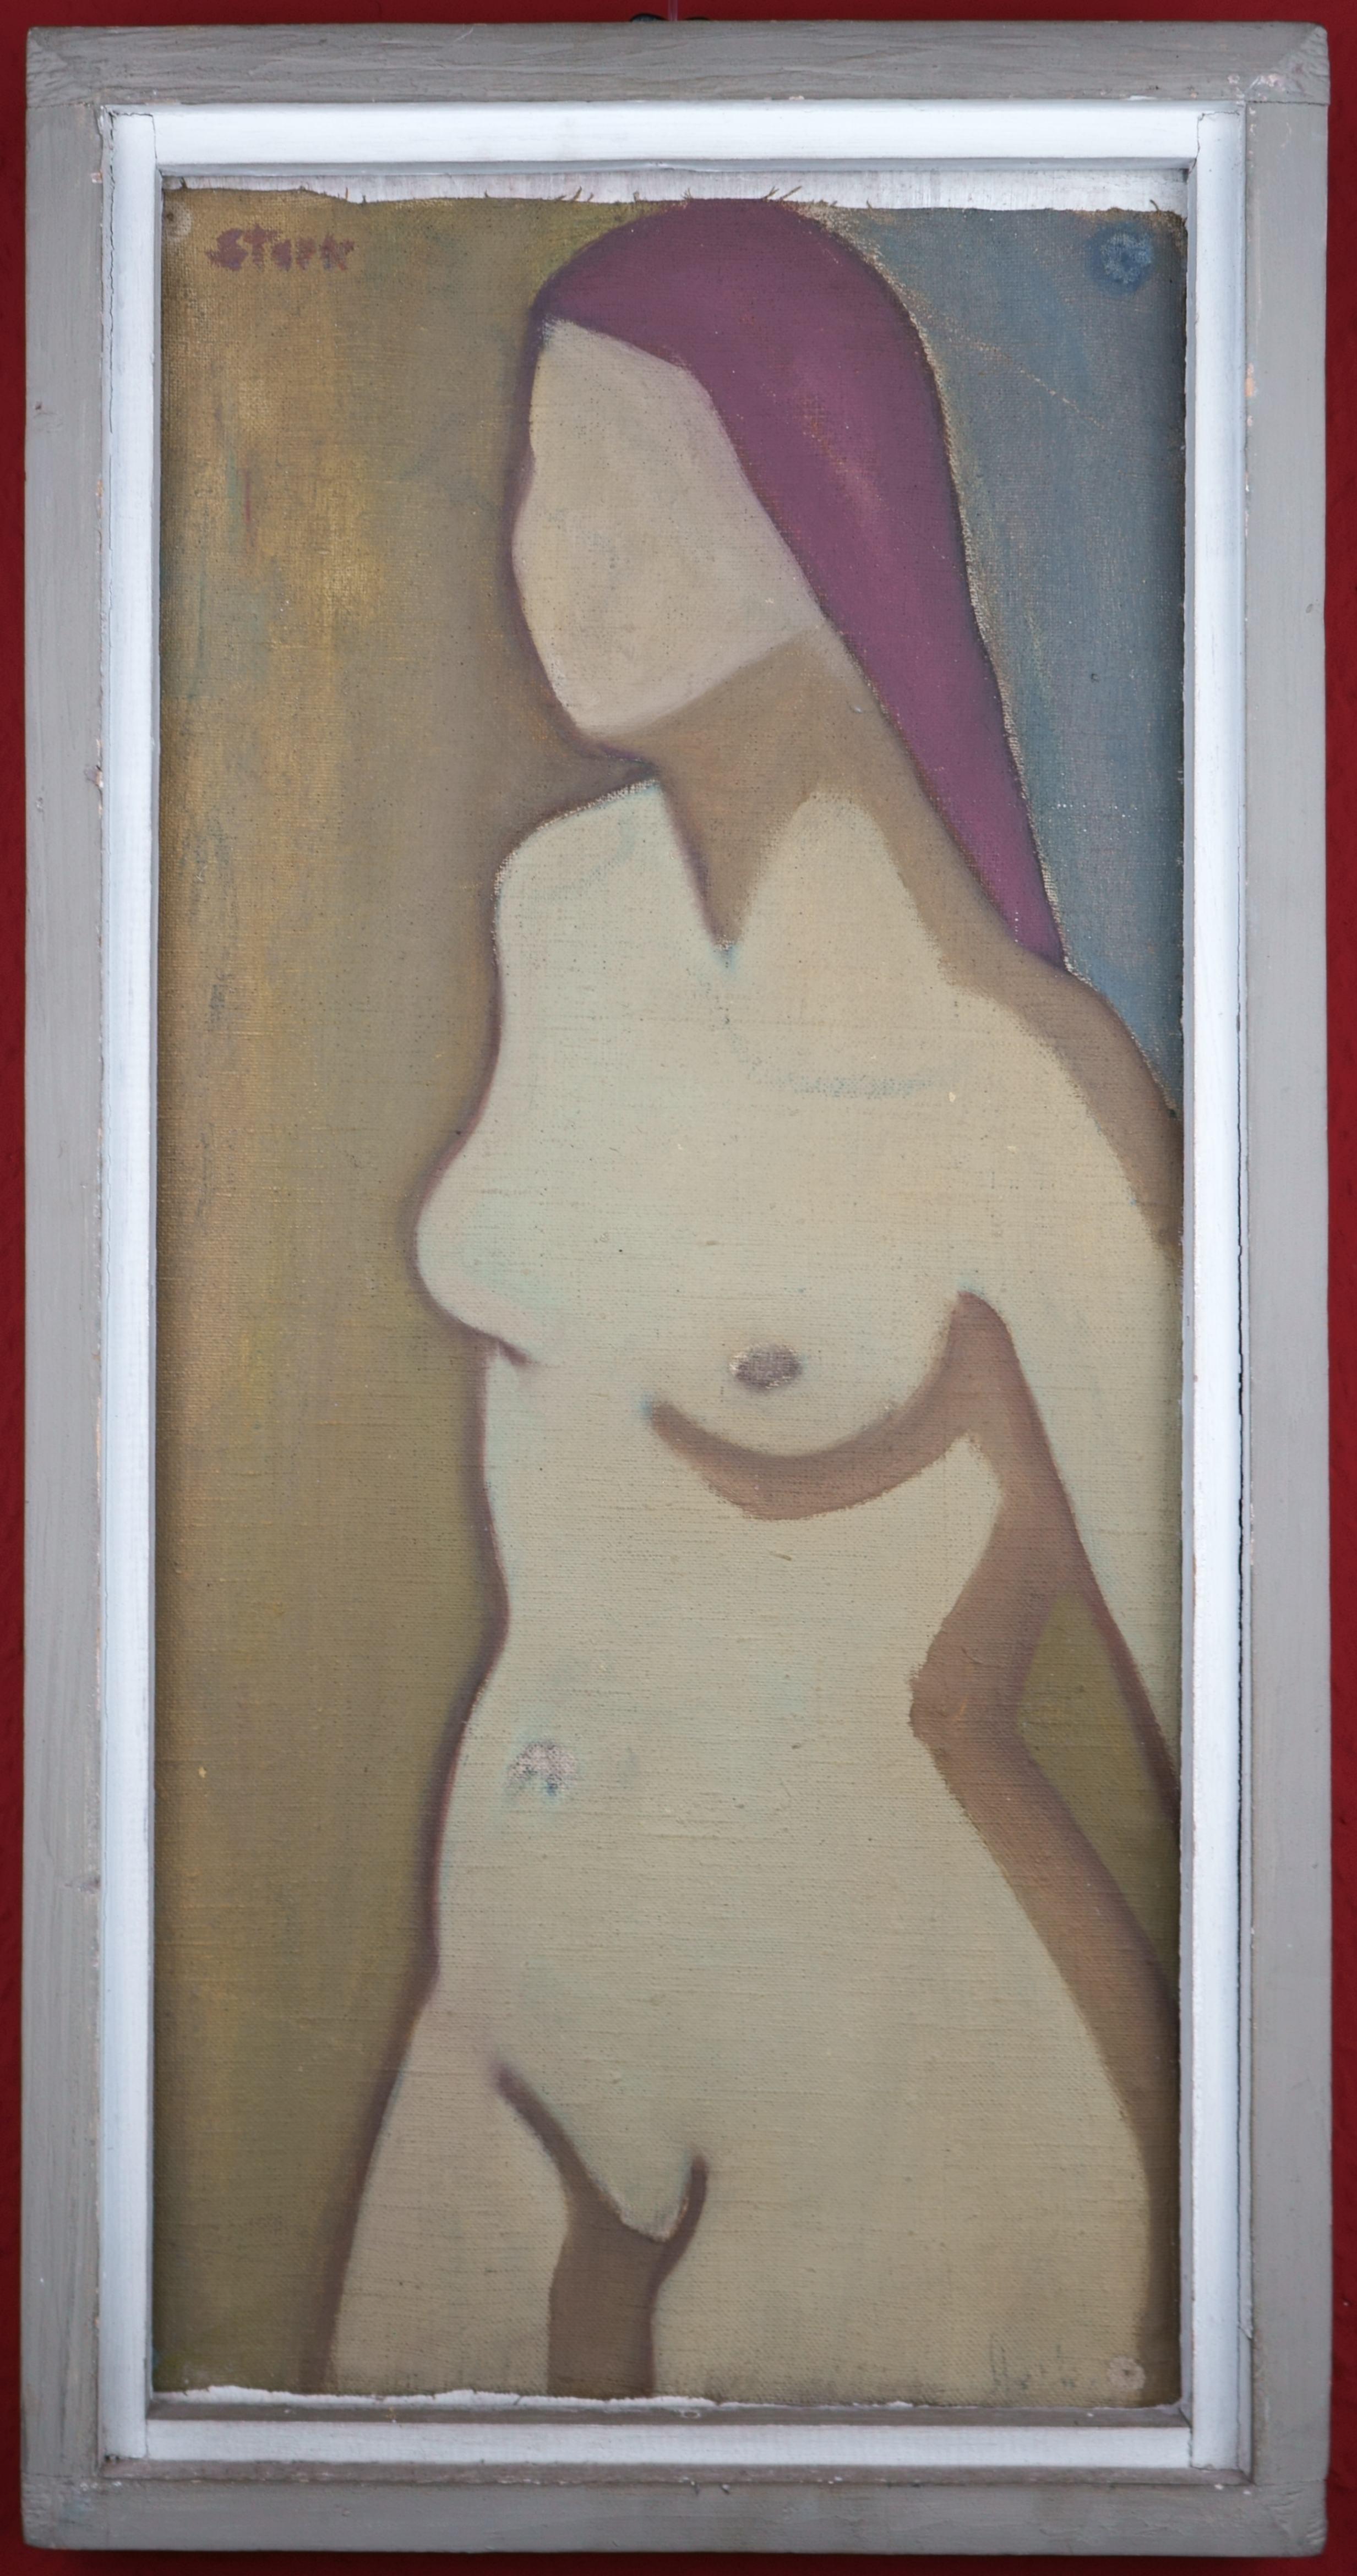 Small Nude / - Abstract Figurativity - - Brown Figurative Painting by Gustl Stark